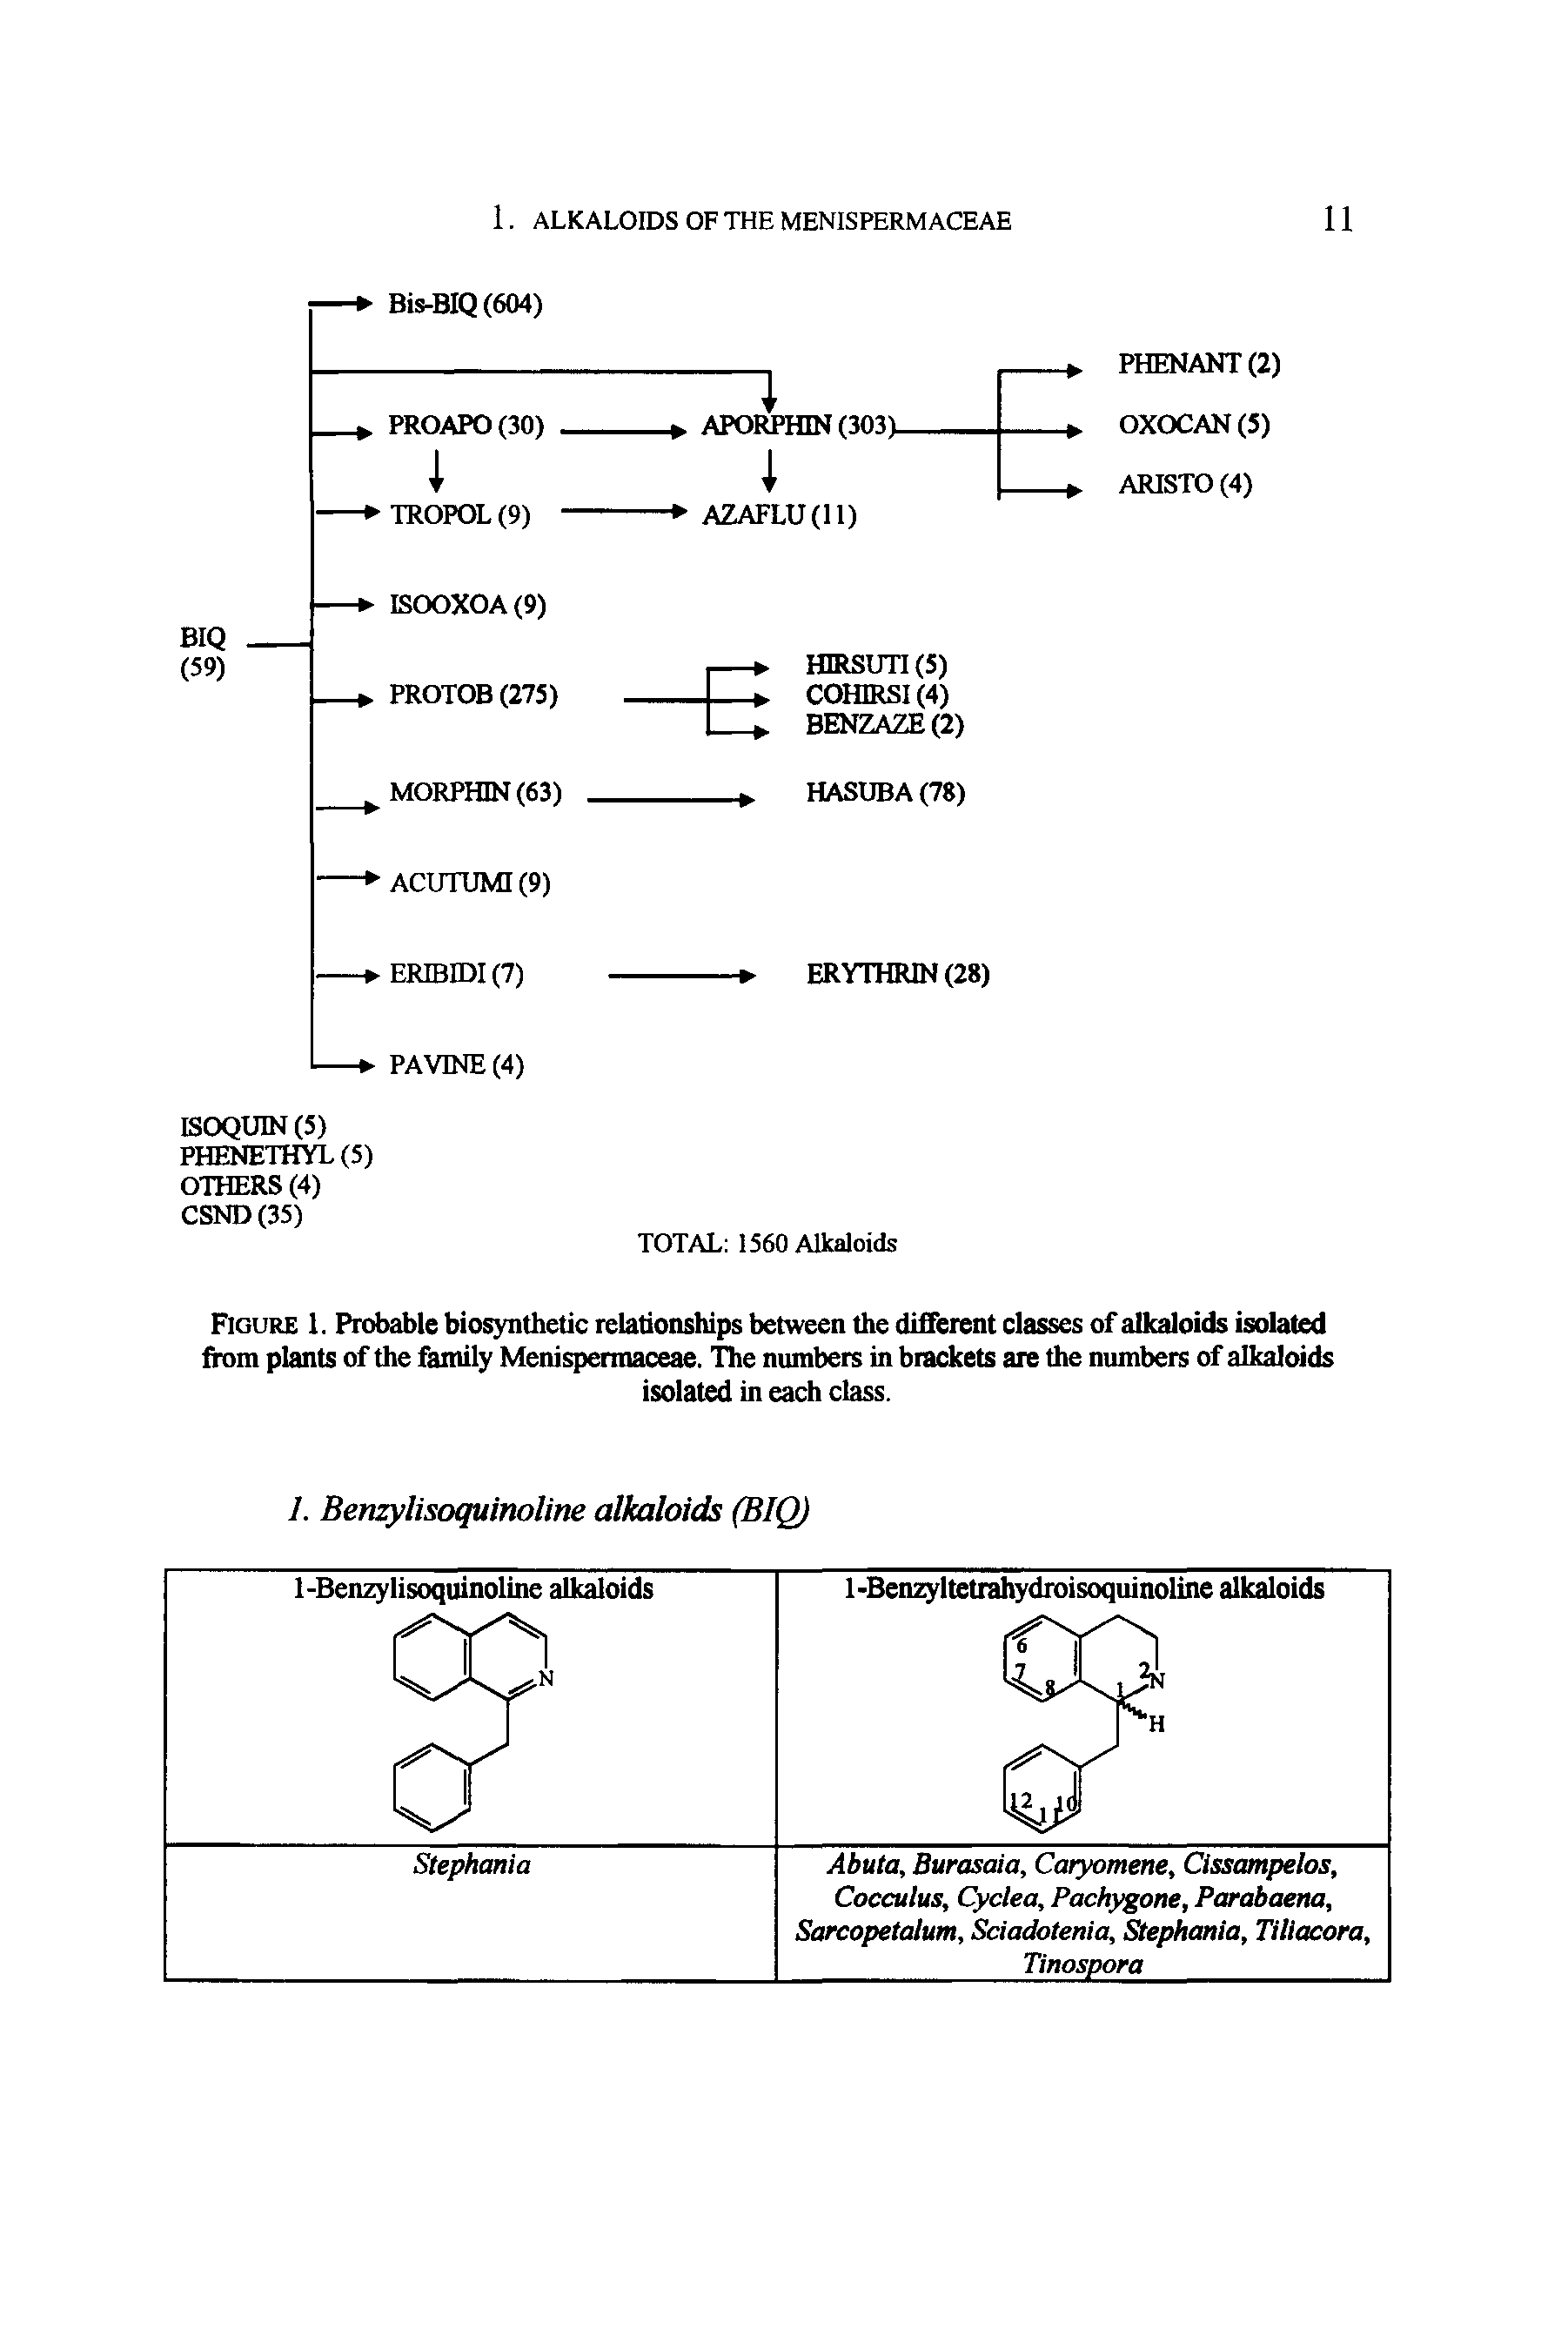 Figure 1. Probable biosynthetic relationships between the different classes of alkaloids isolated from plants of the family Menispermaceae. The numbers in brackets are the numbers of alkaloids...